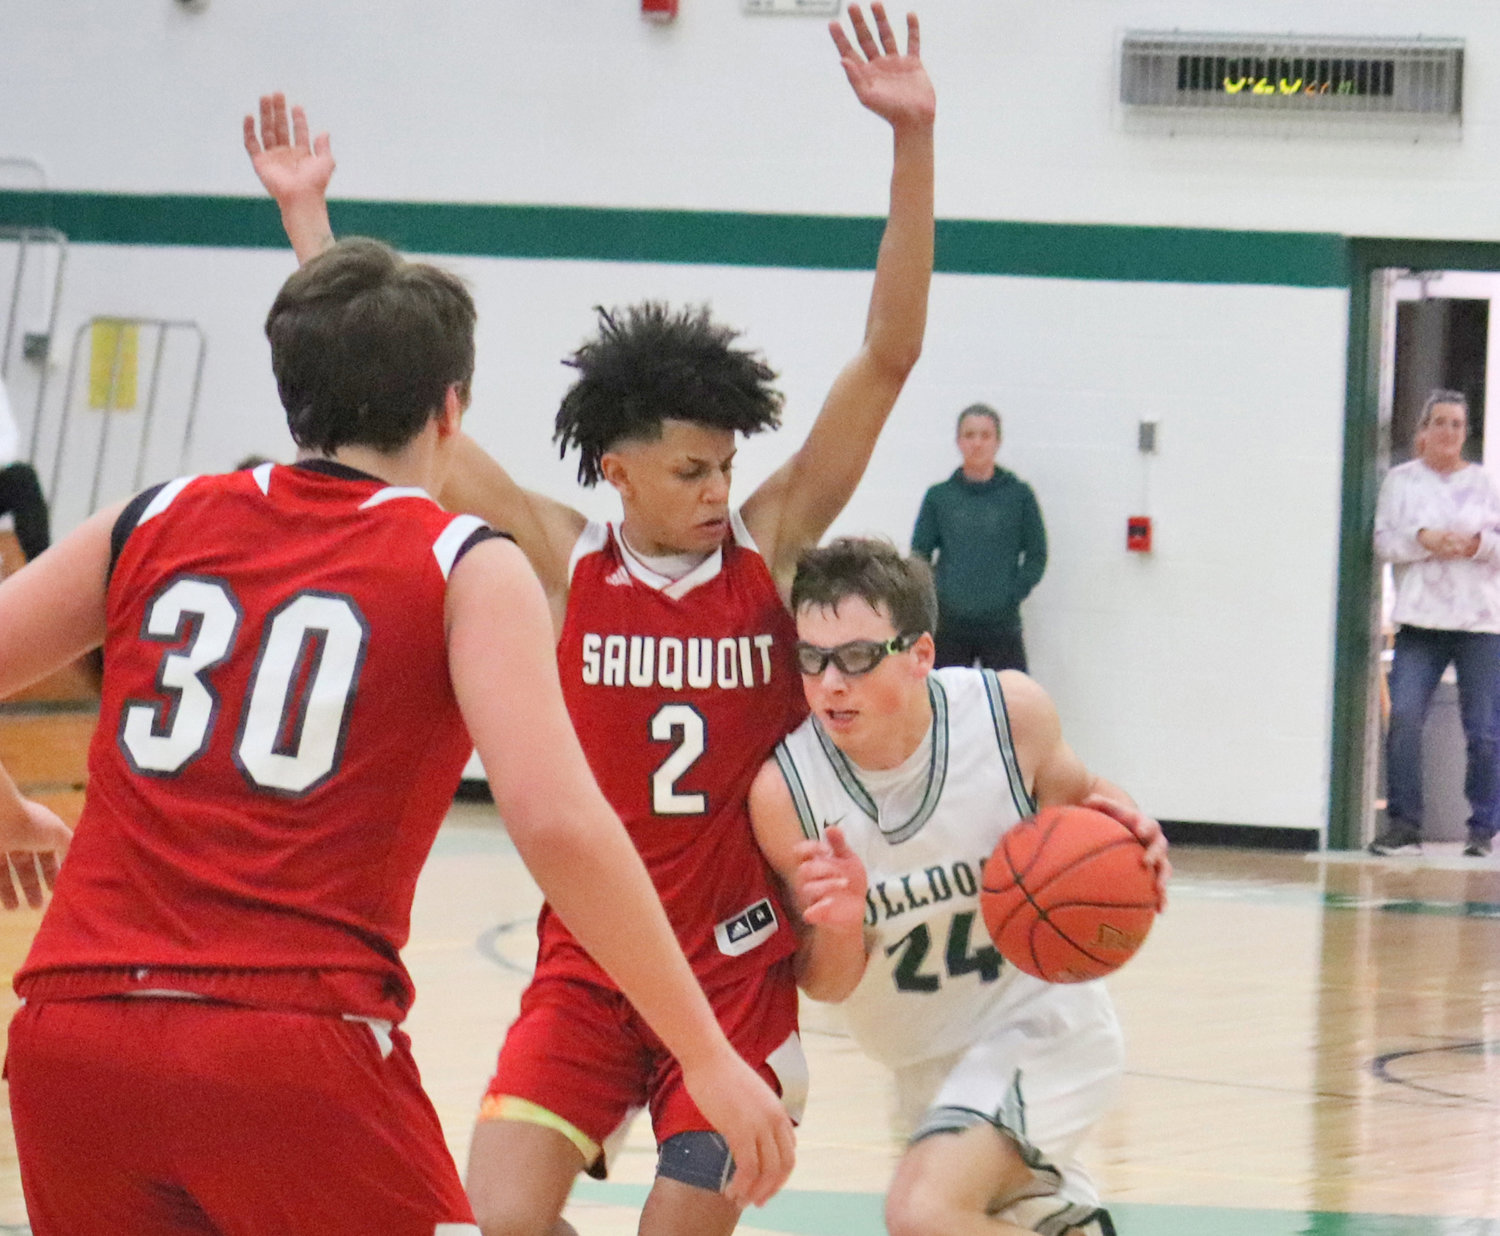 Jack Williams of Westmoreland drives to the basketball against Sauquoit Valley defender Donovan Nelson Tuesday at home. Williams scored 12 points in the Bulldogs' 57-54 overtime win.